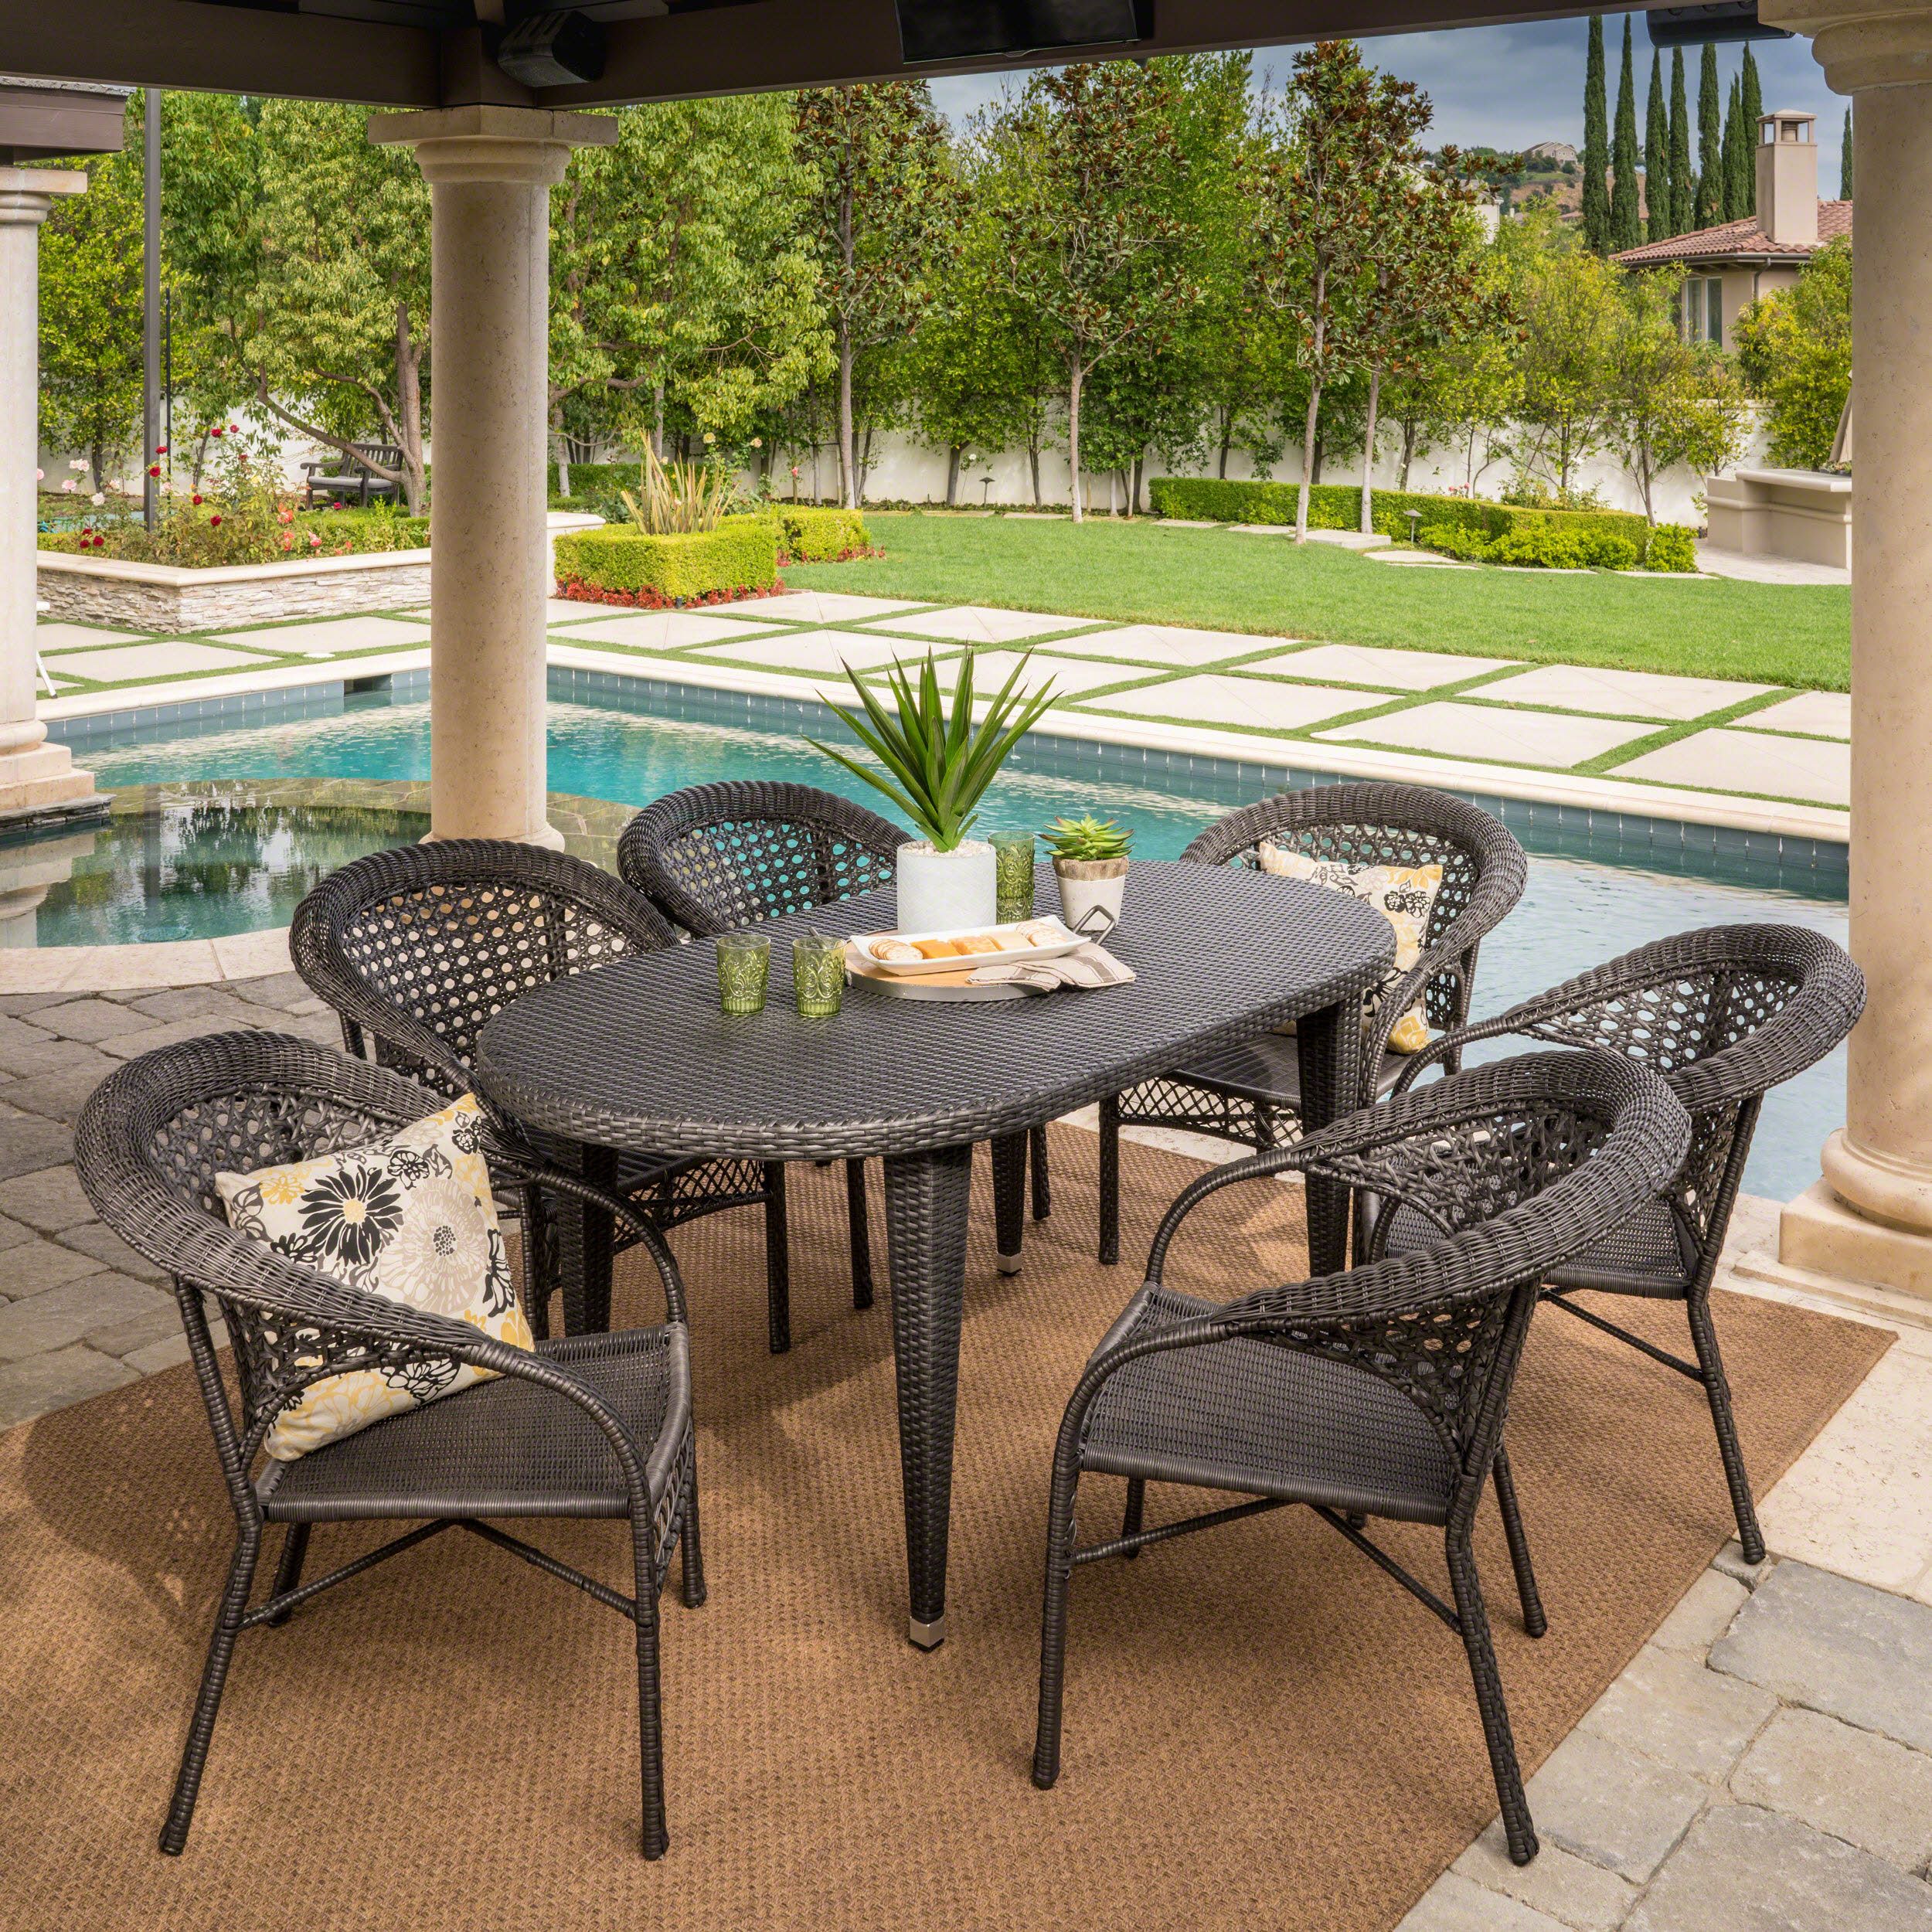 Matador Outdoor 7 Piece Grey Wicker Oval Dining Set With Stacking Inside Gray Wicker Round Patio Dining Sets (View 9 of 15)